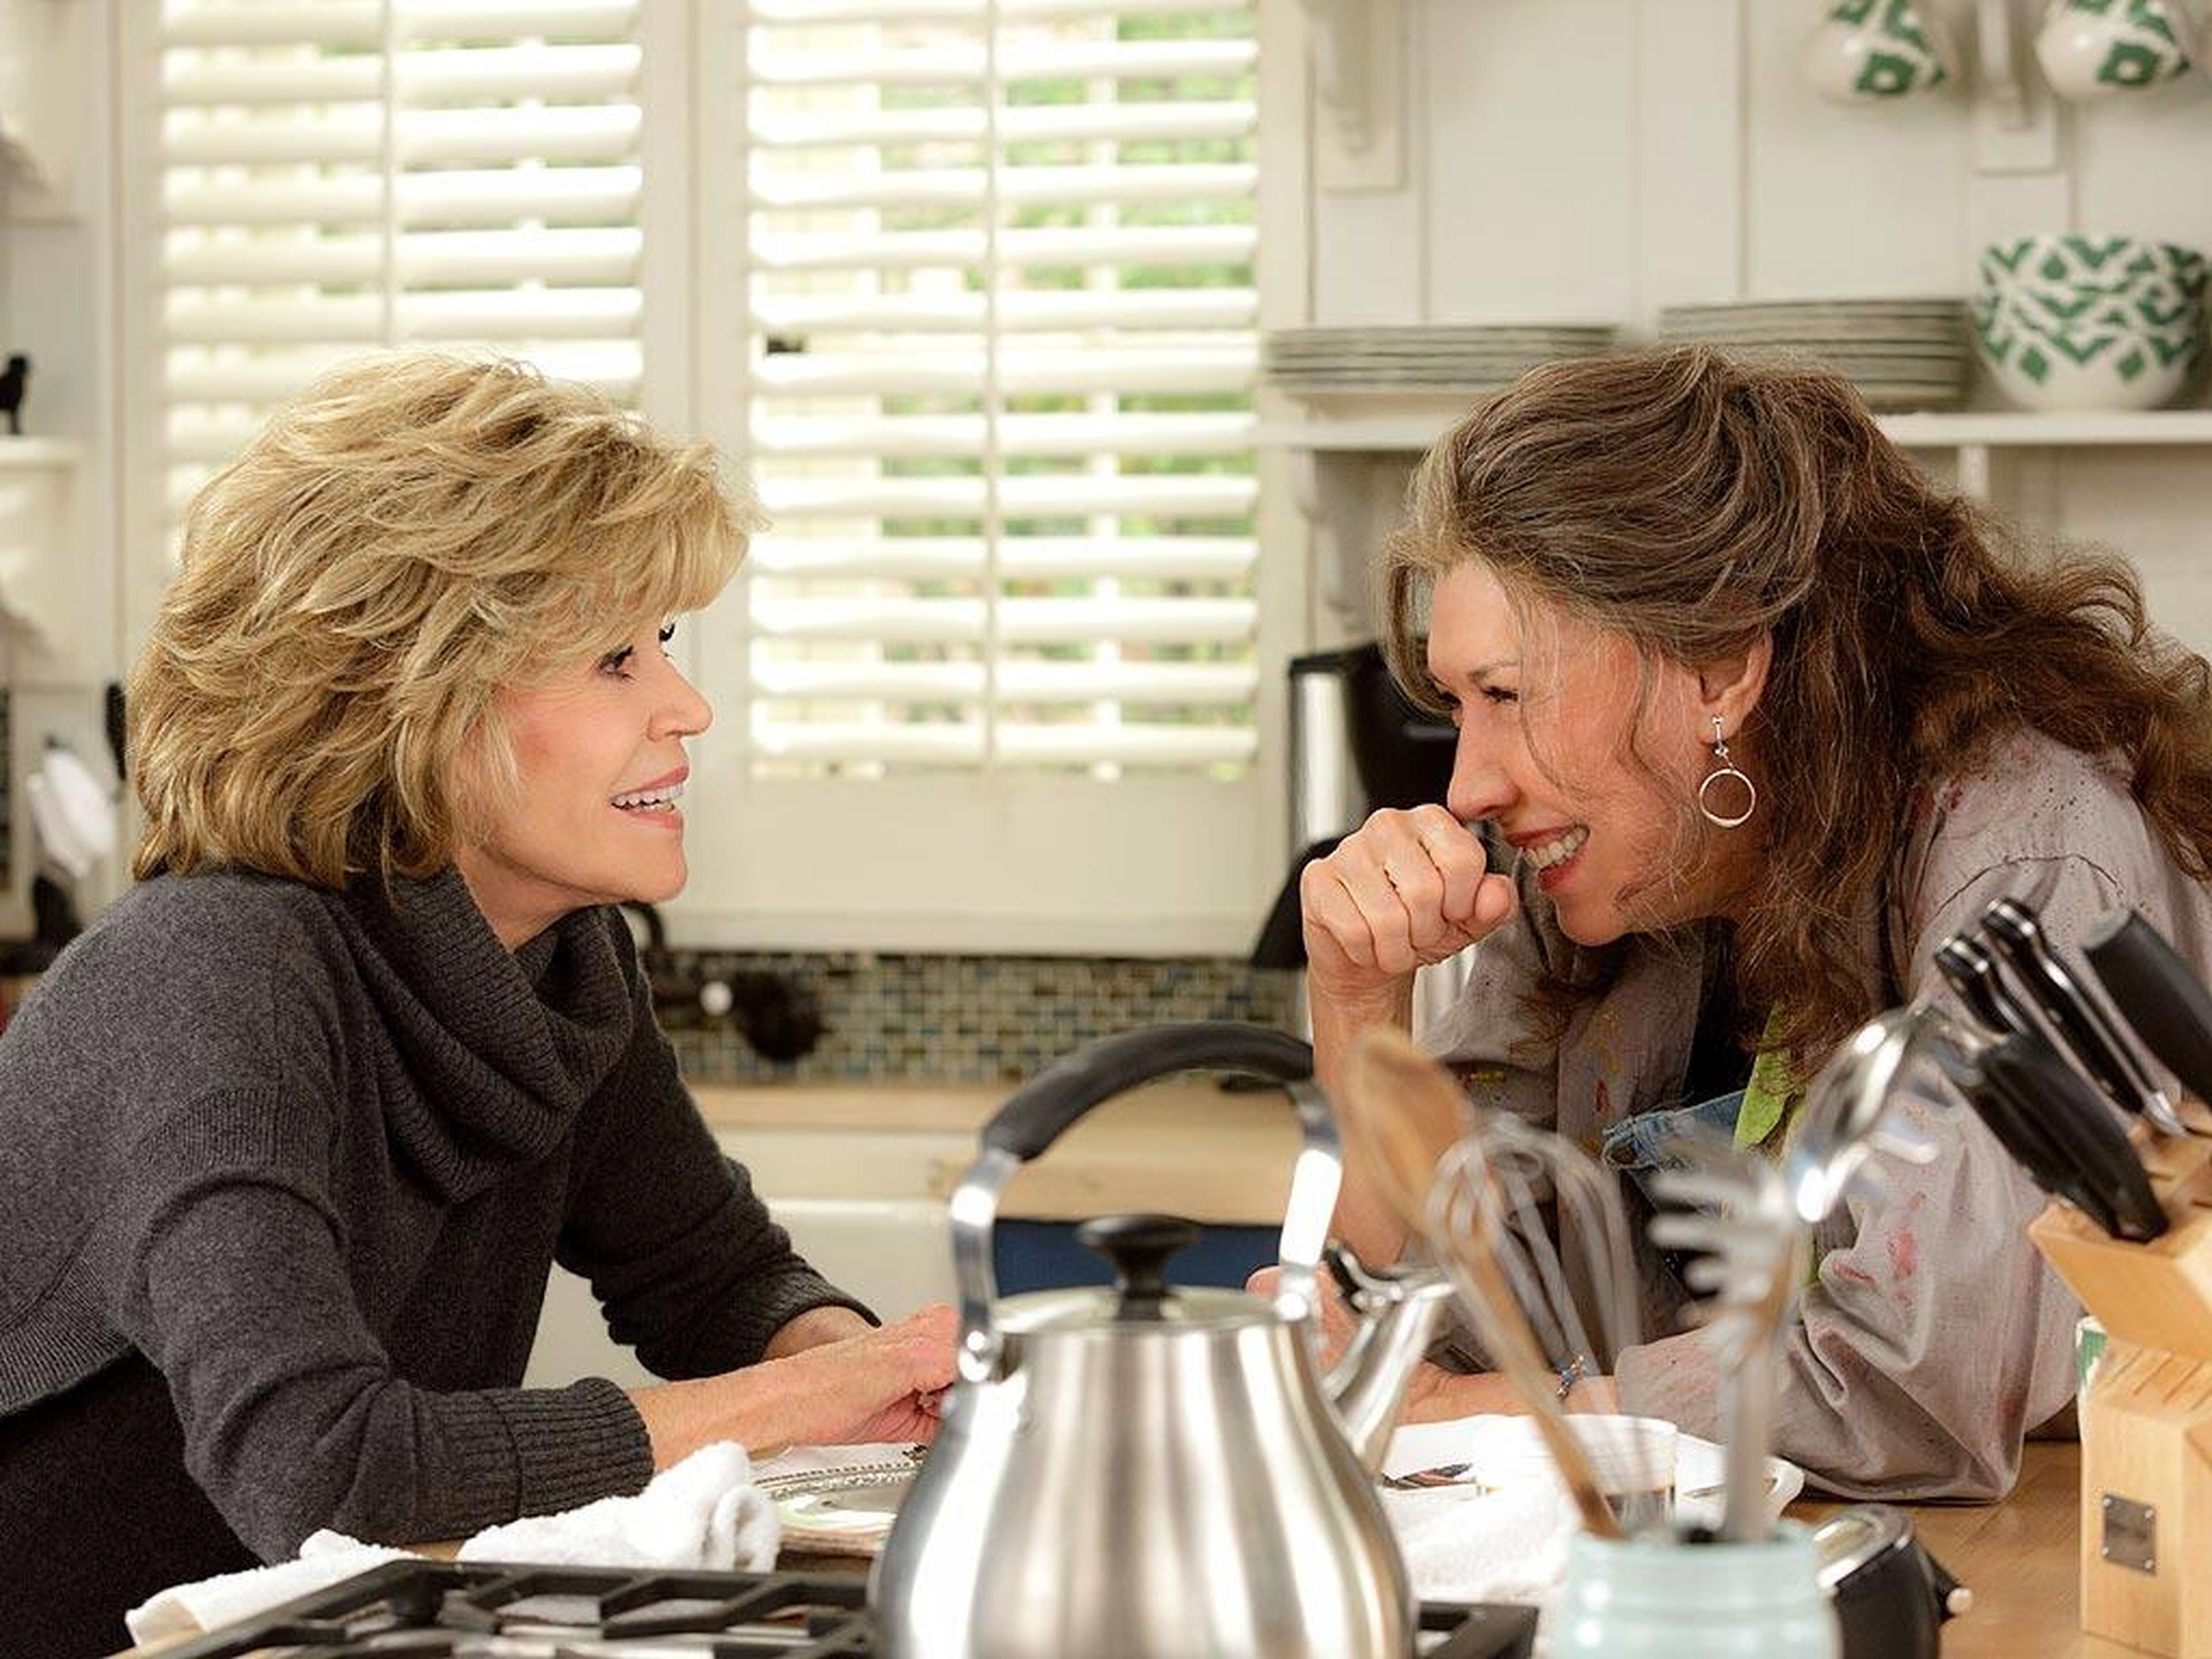 34. "Grace and Frankie" — 89%